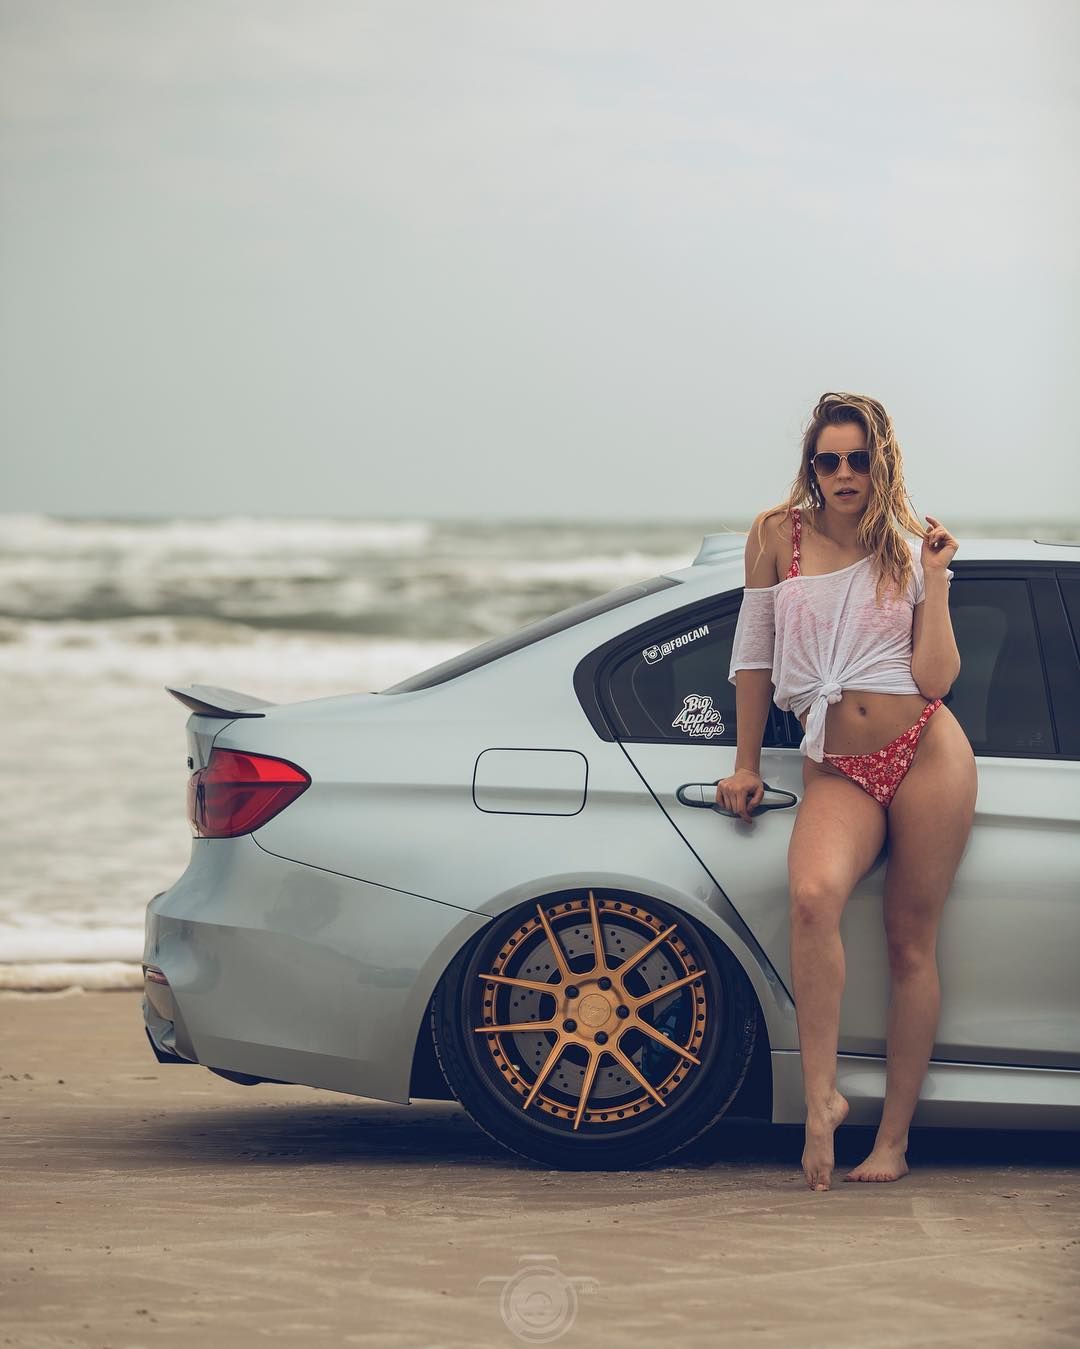 Sarah #sencityslays on Instagram: “My two fav things: the beach and cars ? #risenshine . . . . . . . .#nowords #mpower_official #bmwm_insta #bmw #bimmer #suspension #low…”